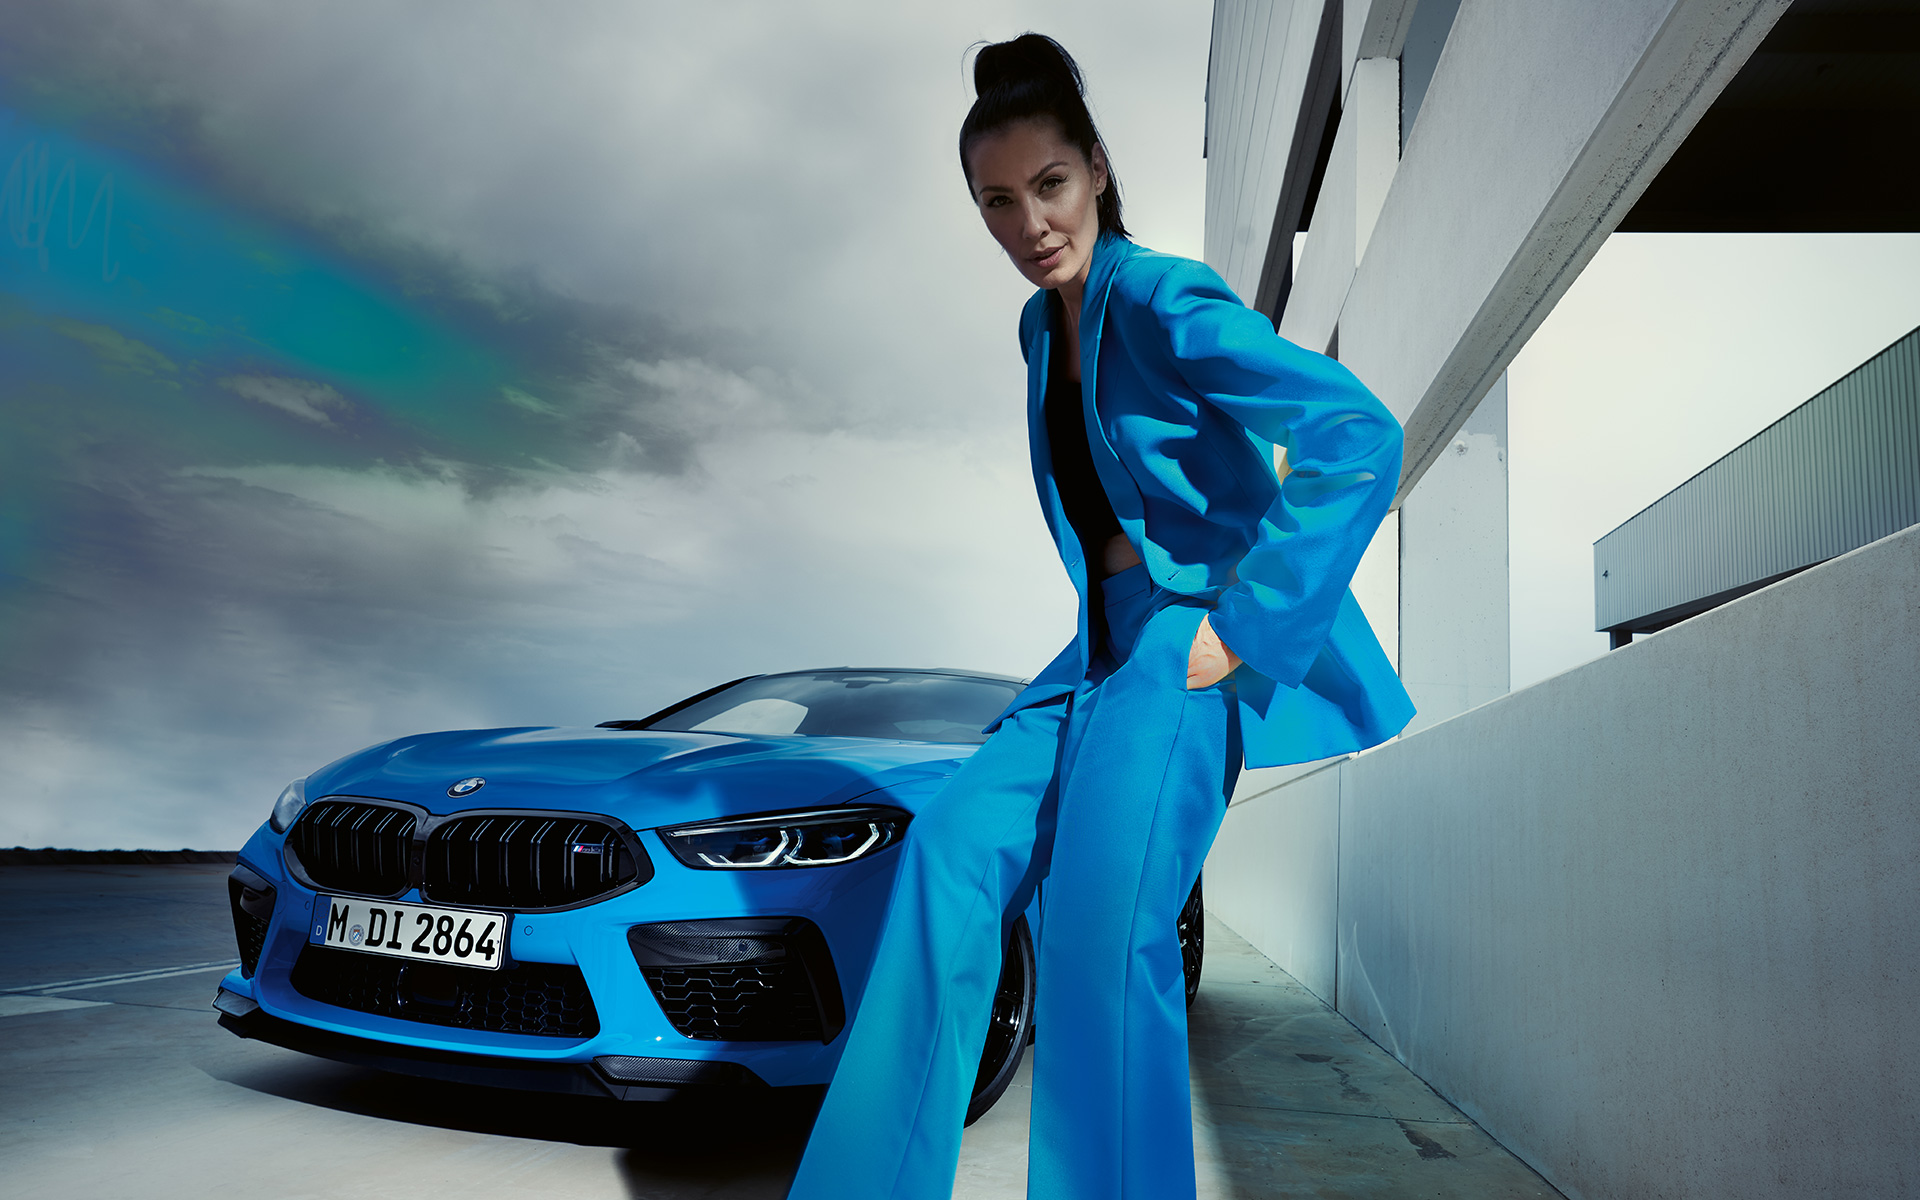 BMW M8 Competition Coupé F92 LCI Facelift 2022 Daytona Beach blue uni three-quarter front view with a female model in blue trouser suit